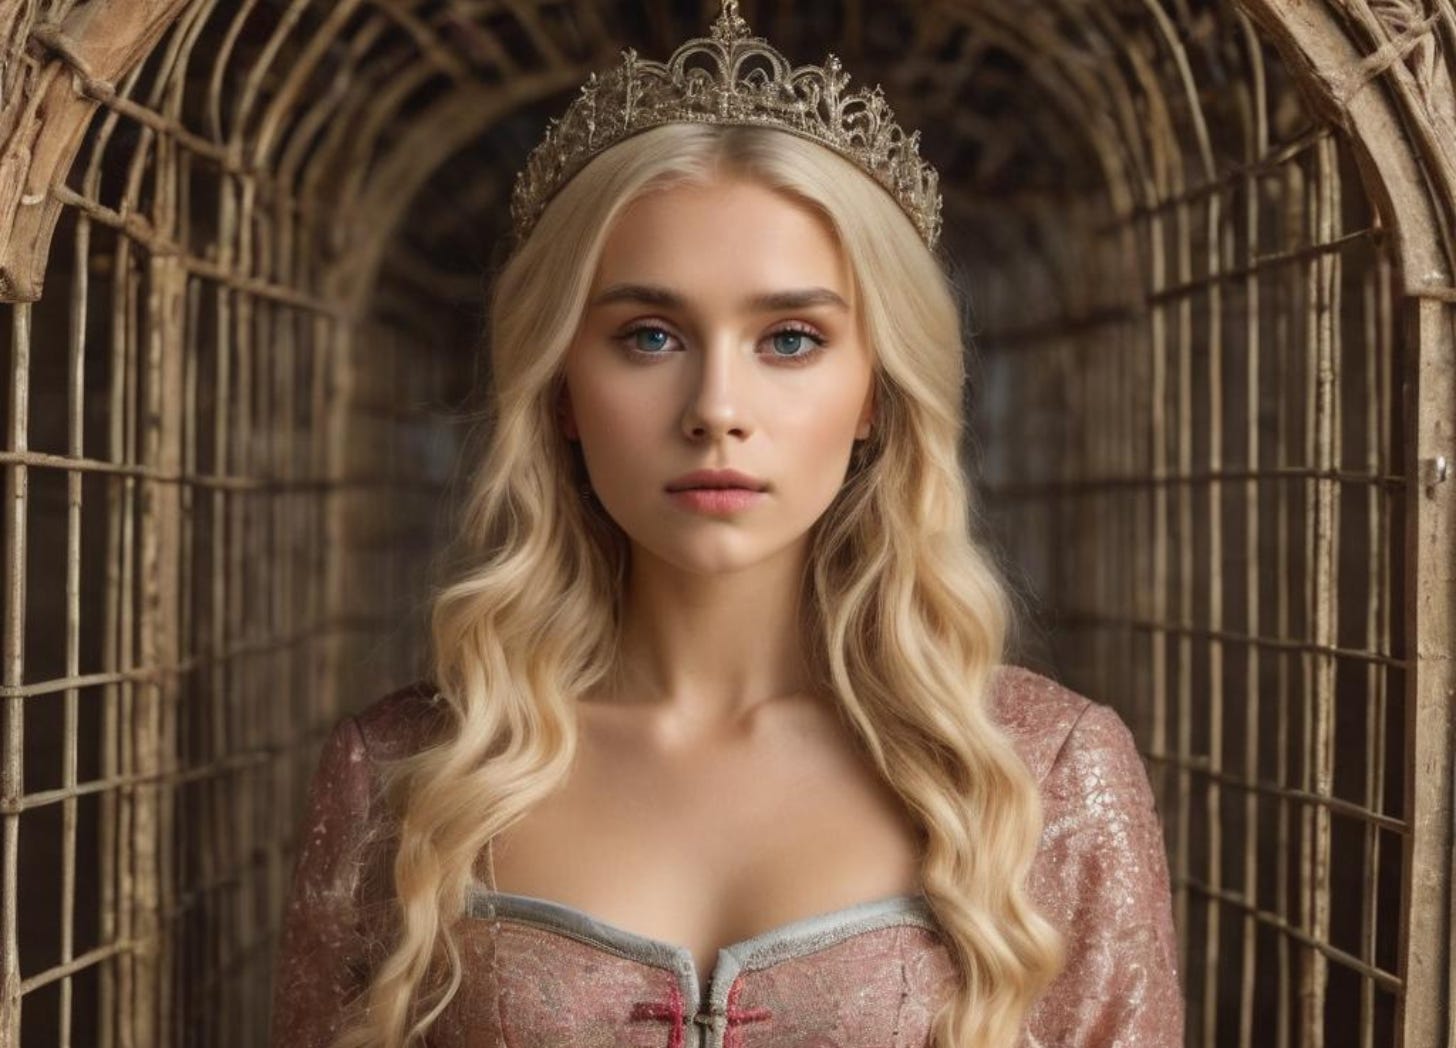 AI generated image of a beautiful blonde princess in a cage